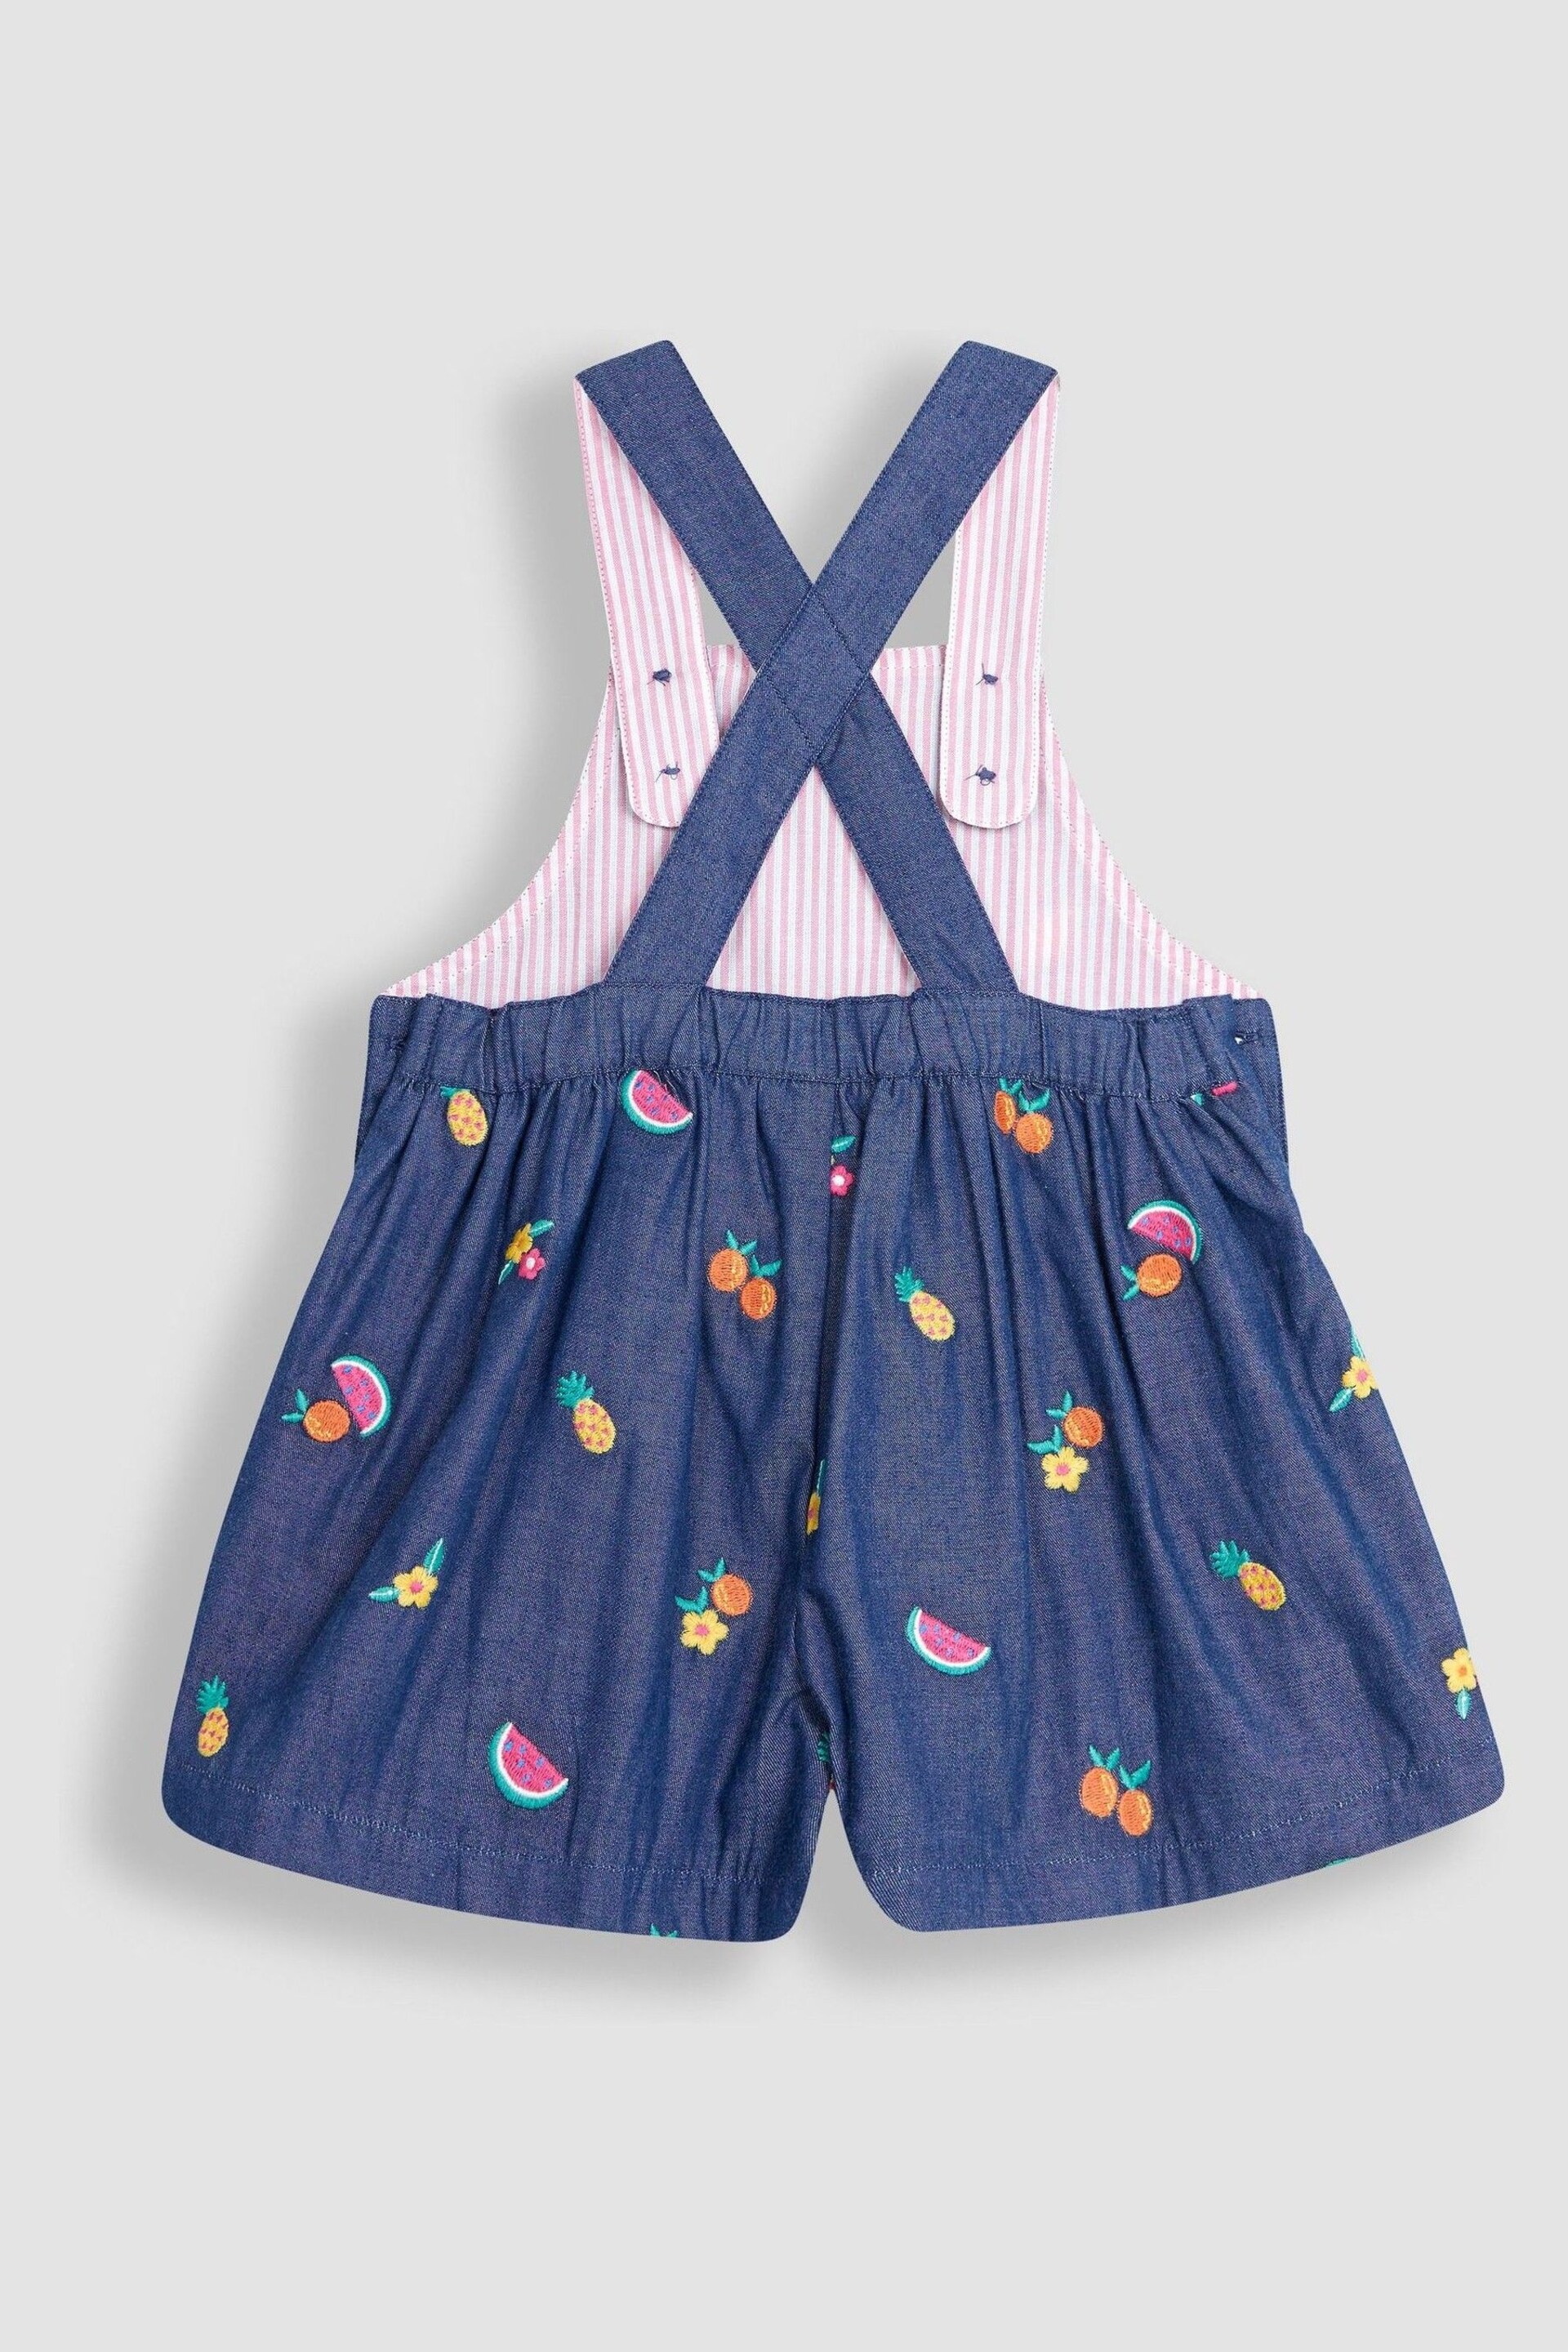 JoJo Maman Bébé Chambray Summer Fruits Embroidered Culotte Dungarees - Image 2 of 3